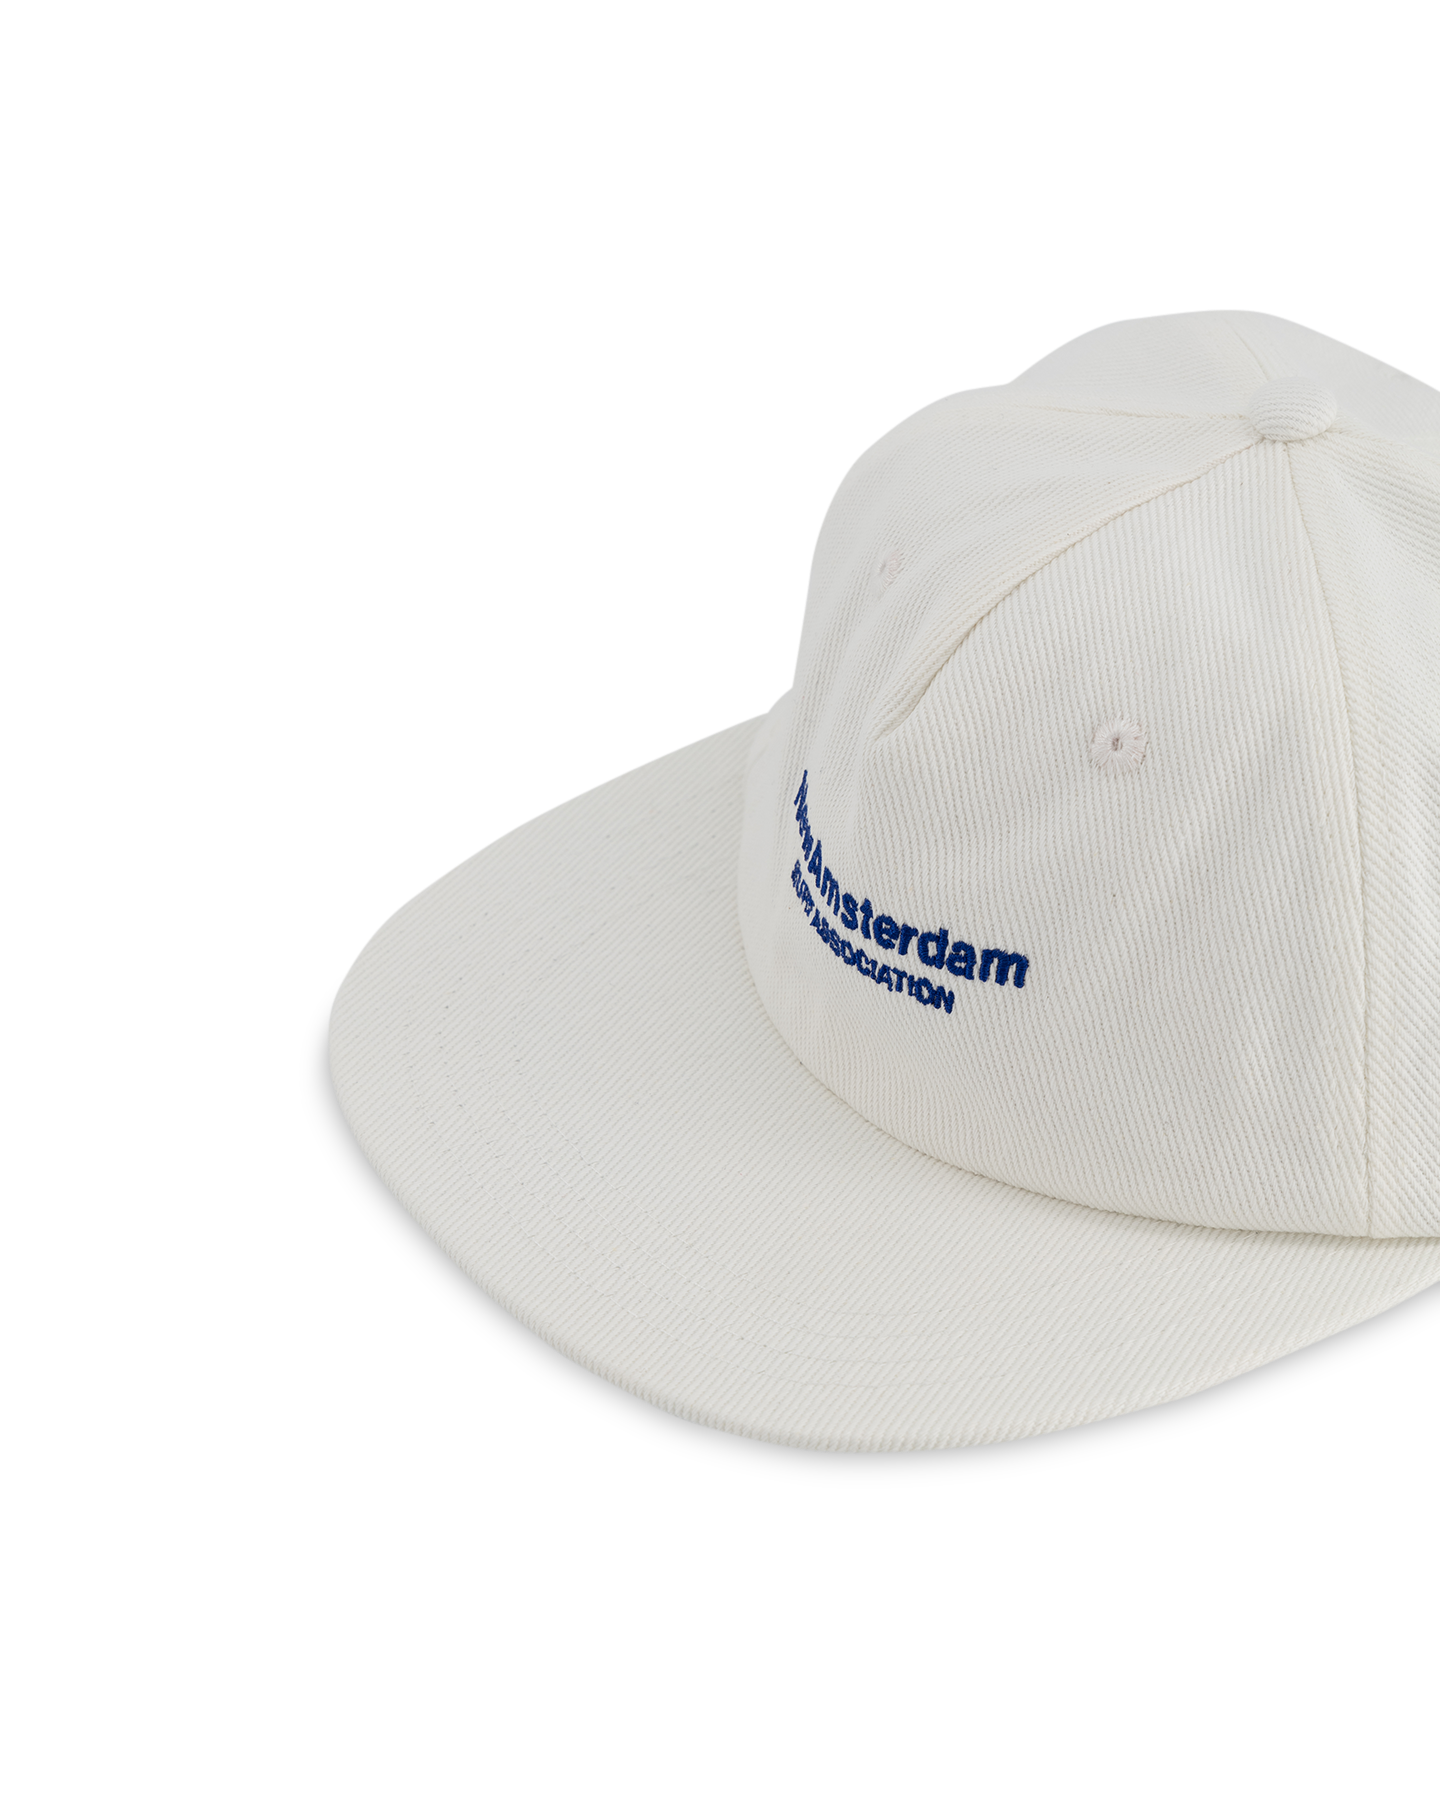 New Amsterdam Surf Association Name Cap White WIT 3